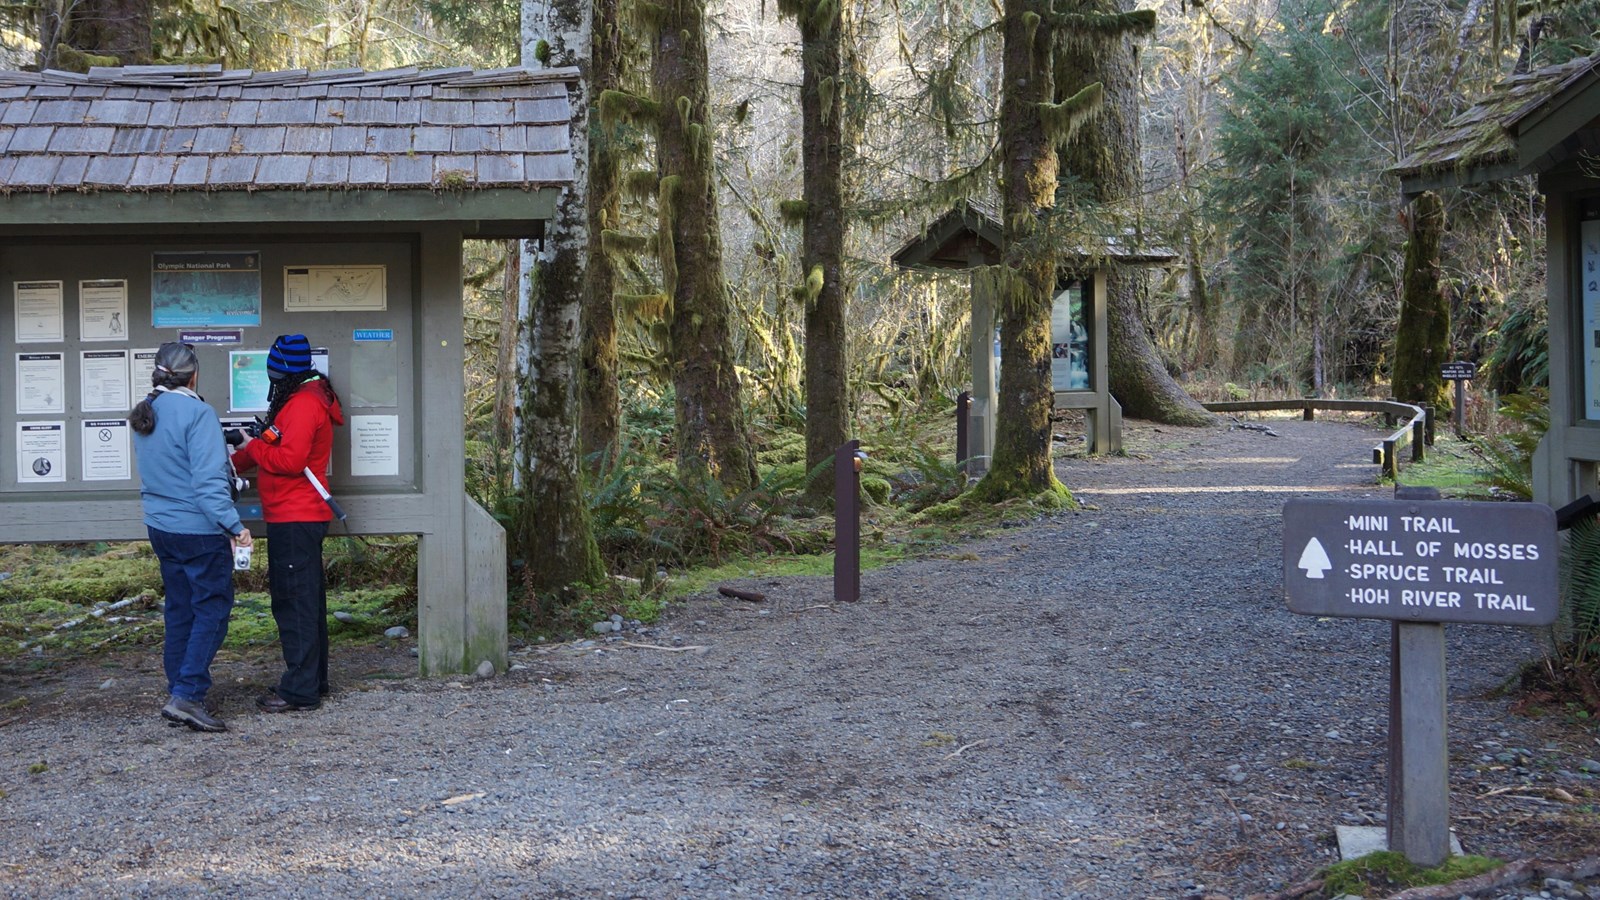 Two hikers looking at a kiosk with posted signs next to a rainforest trailhead.